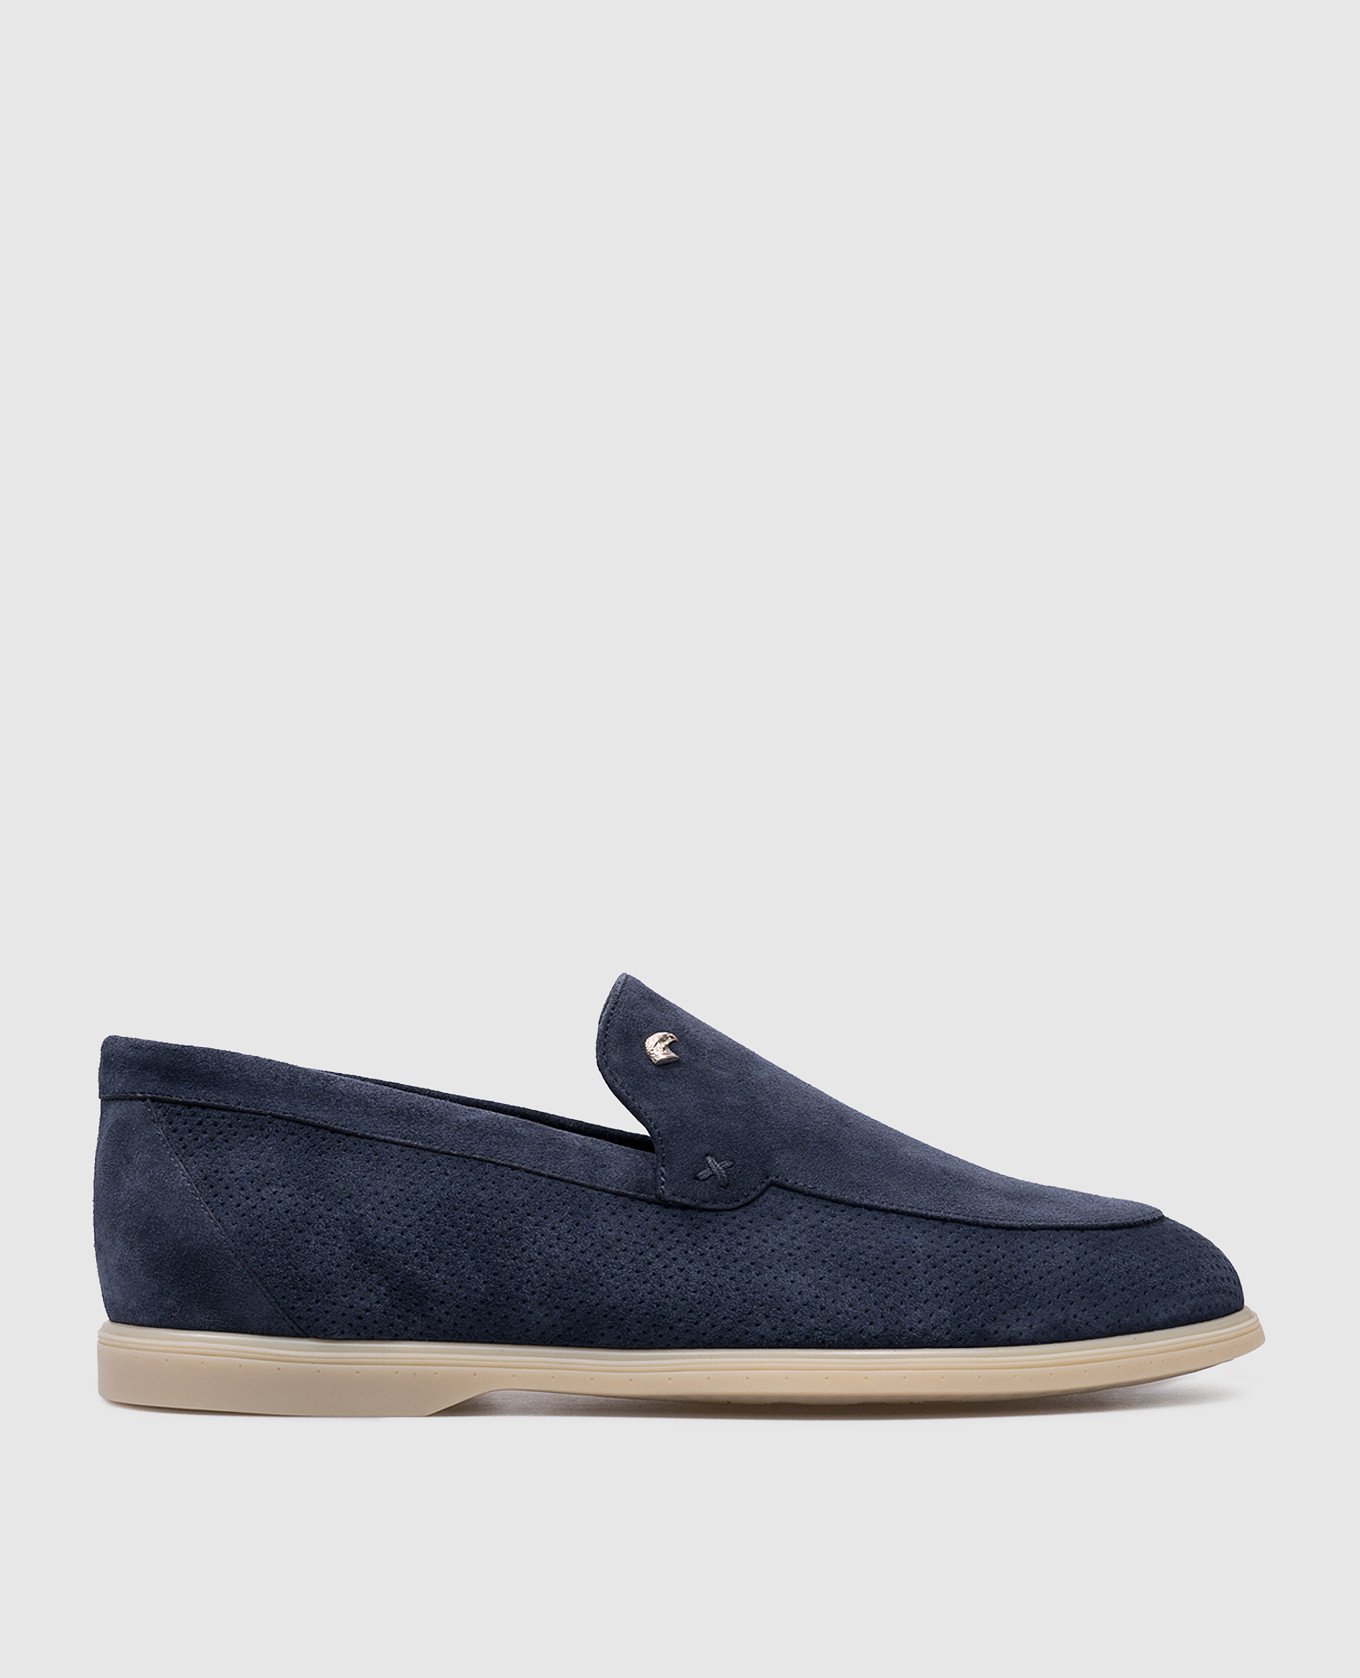 Blue suede loafers with metal logo